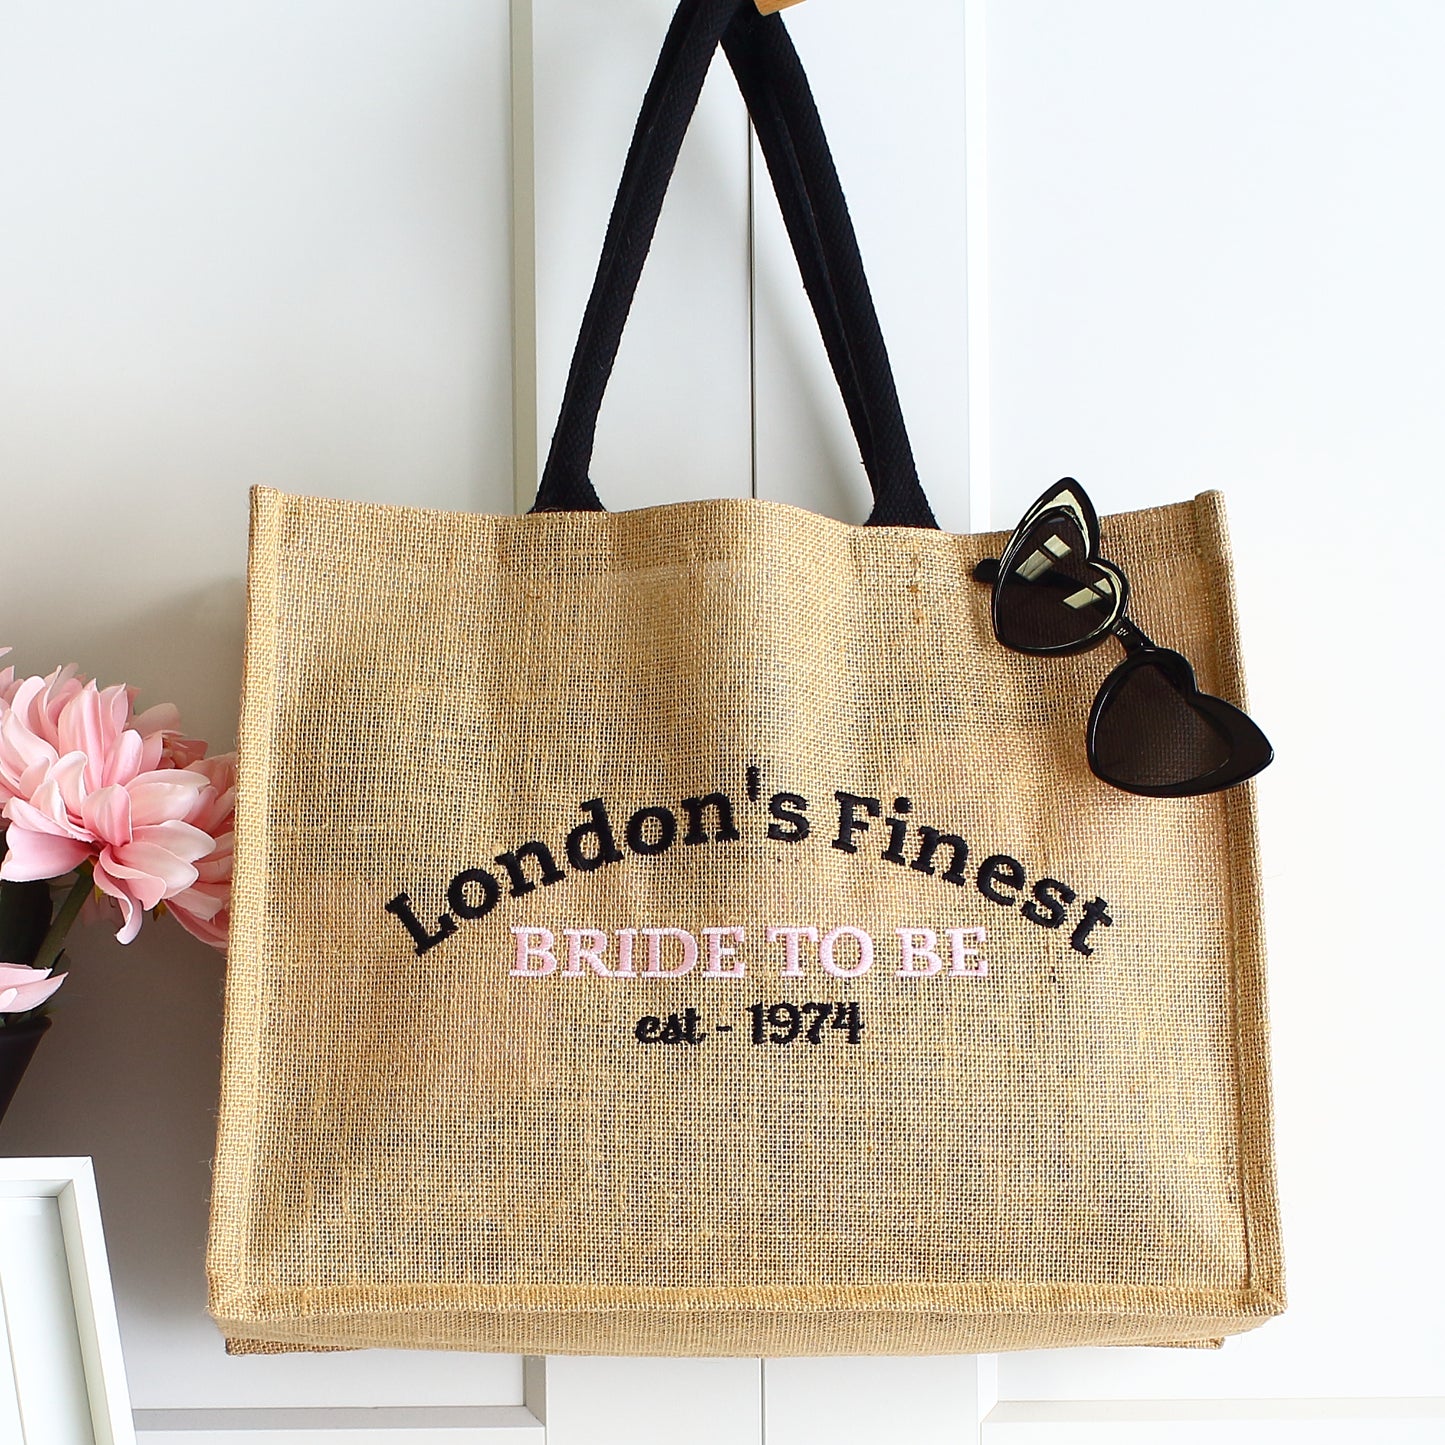 Embroidered Finest... Bride to be tote Bag